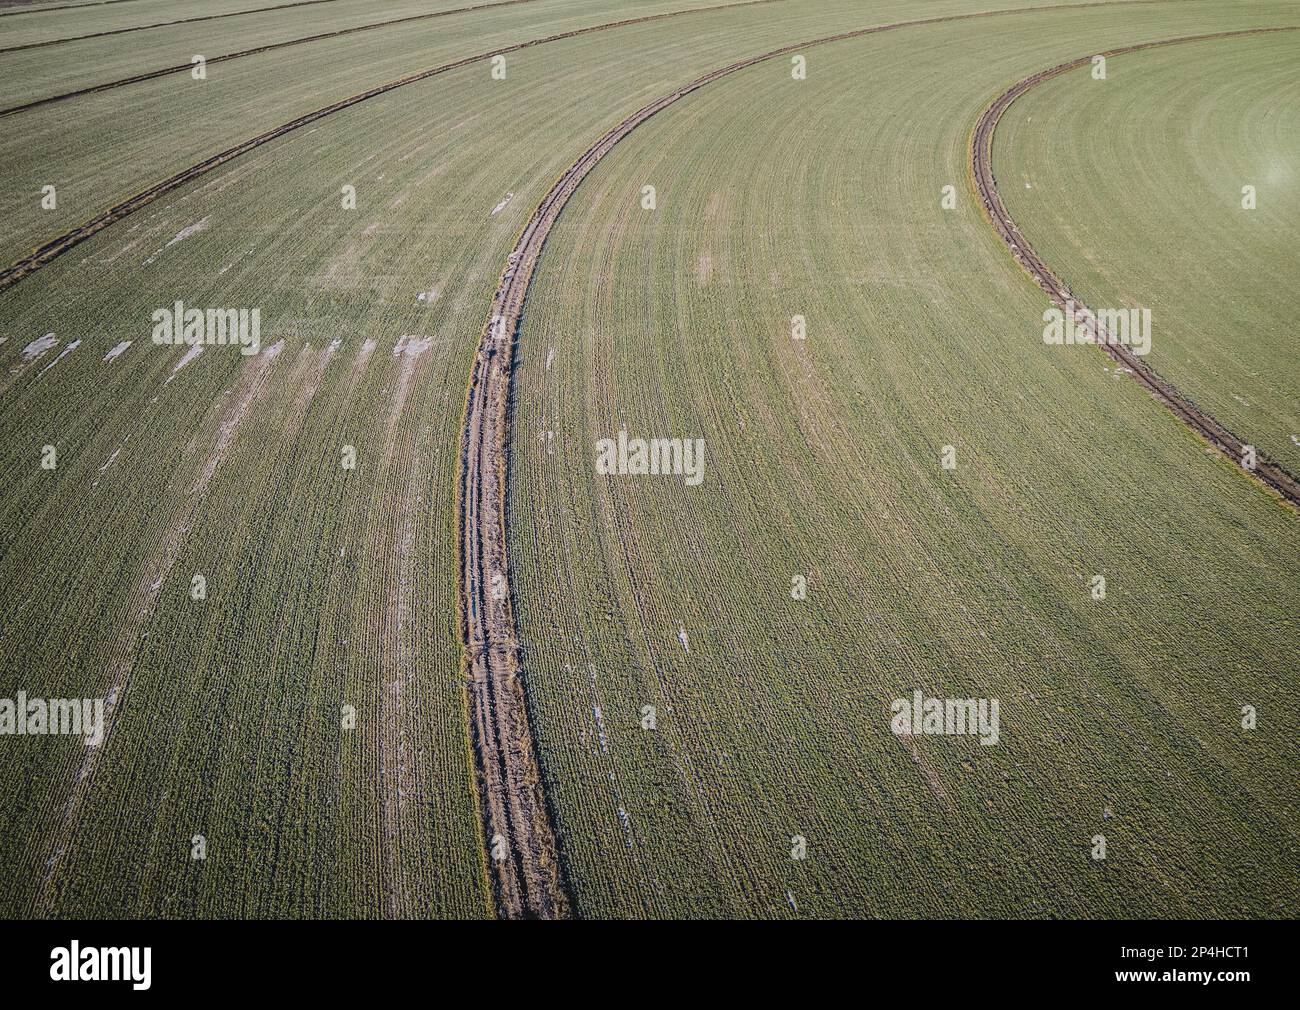 Aerial view of agricultural crop and farmland near Dell City, Texas Stock Photo